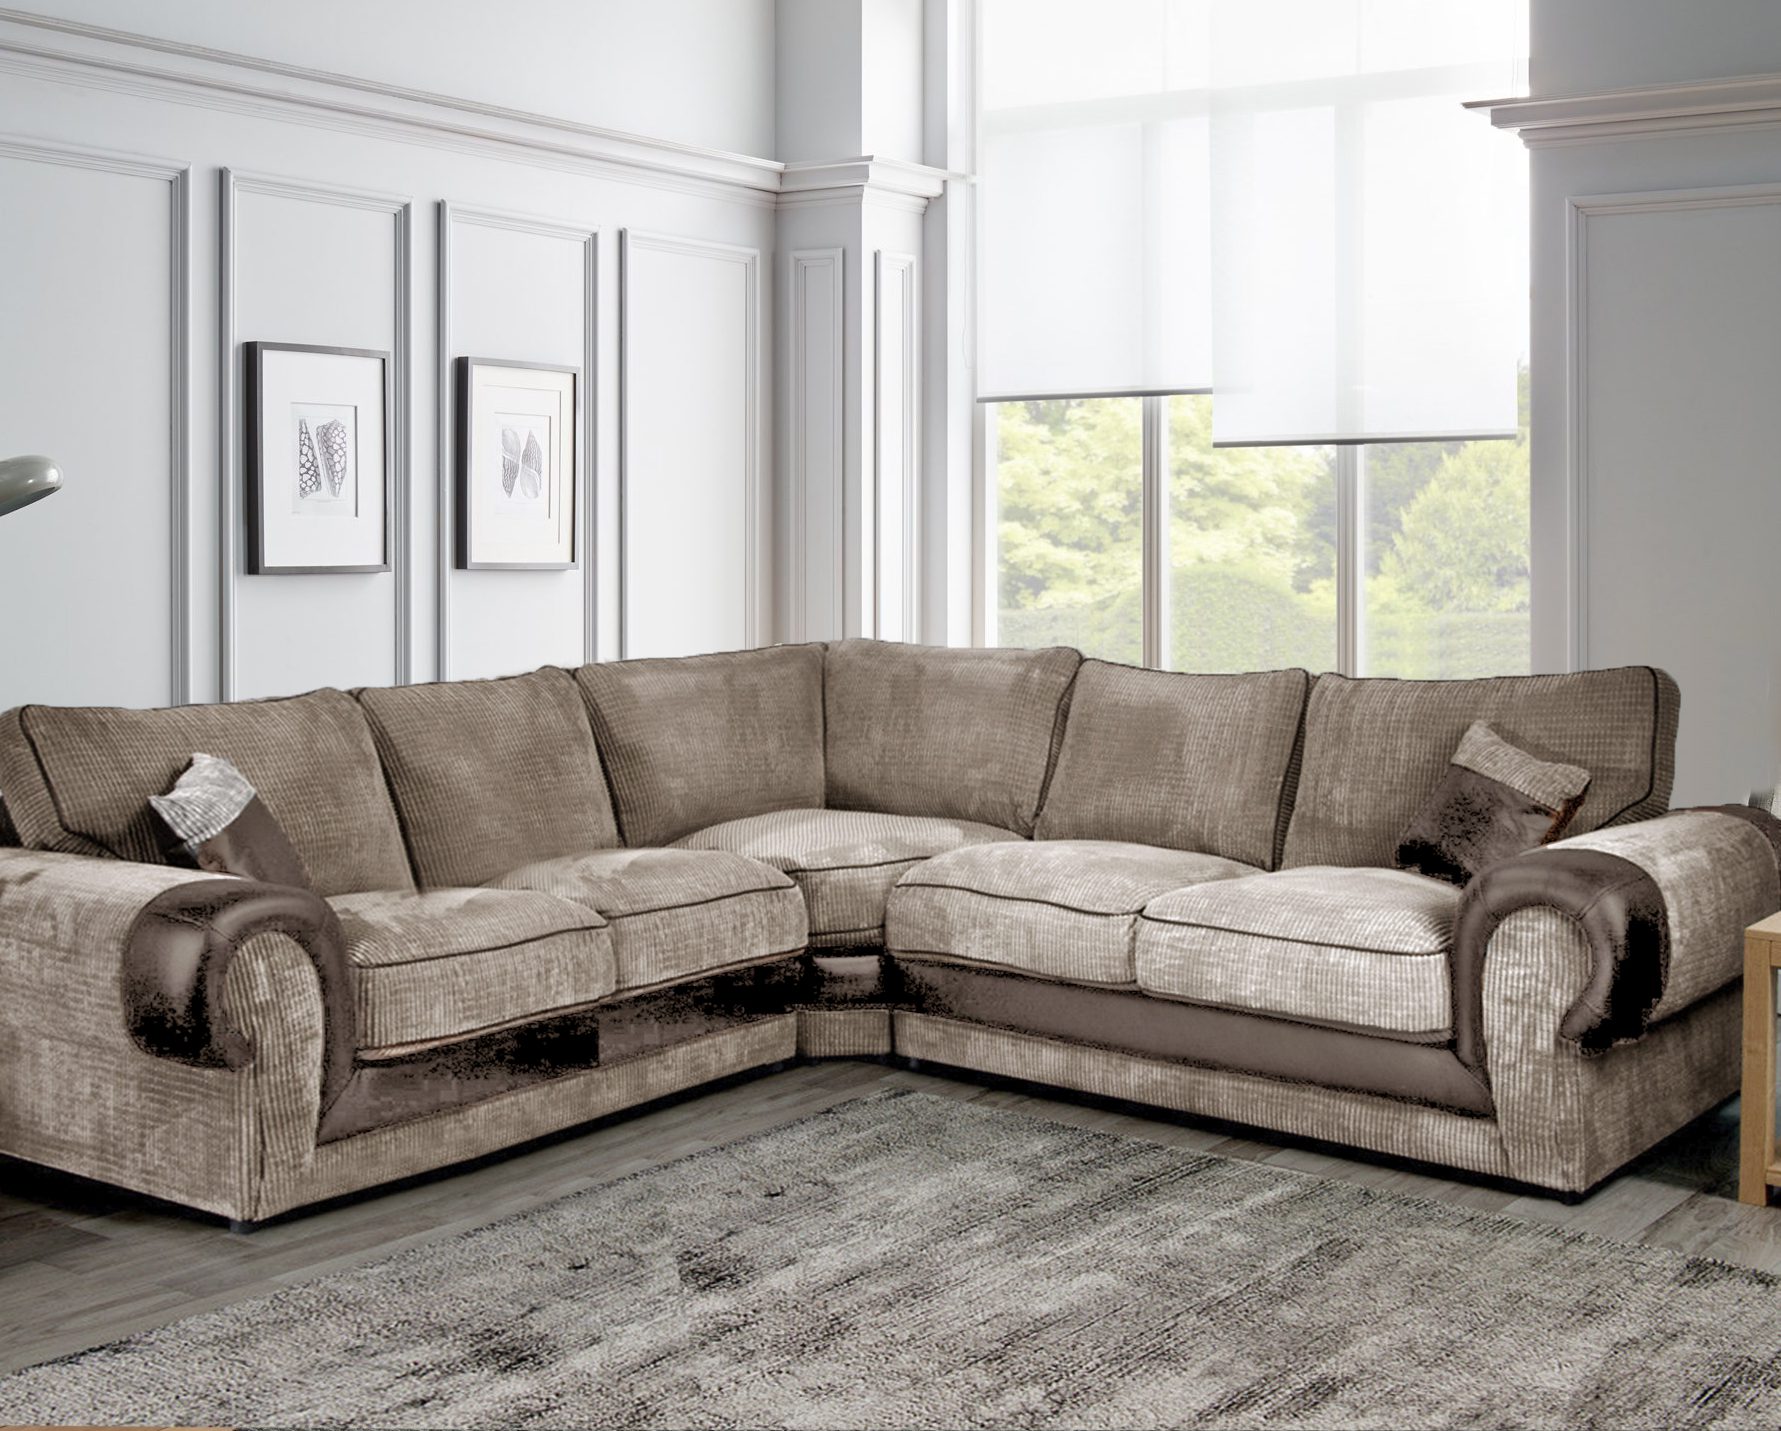 Cornering Style: Discover the Perfect Fit for Your Home with Stunning Corner Sofas